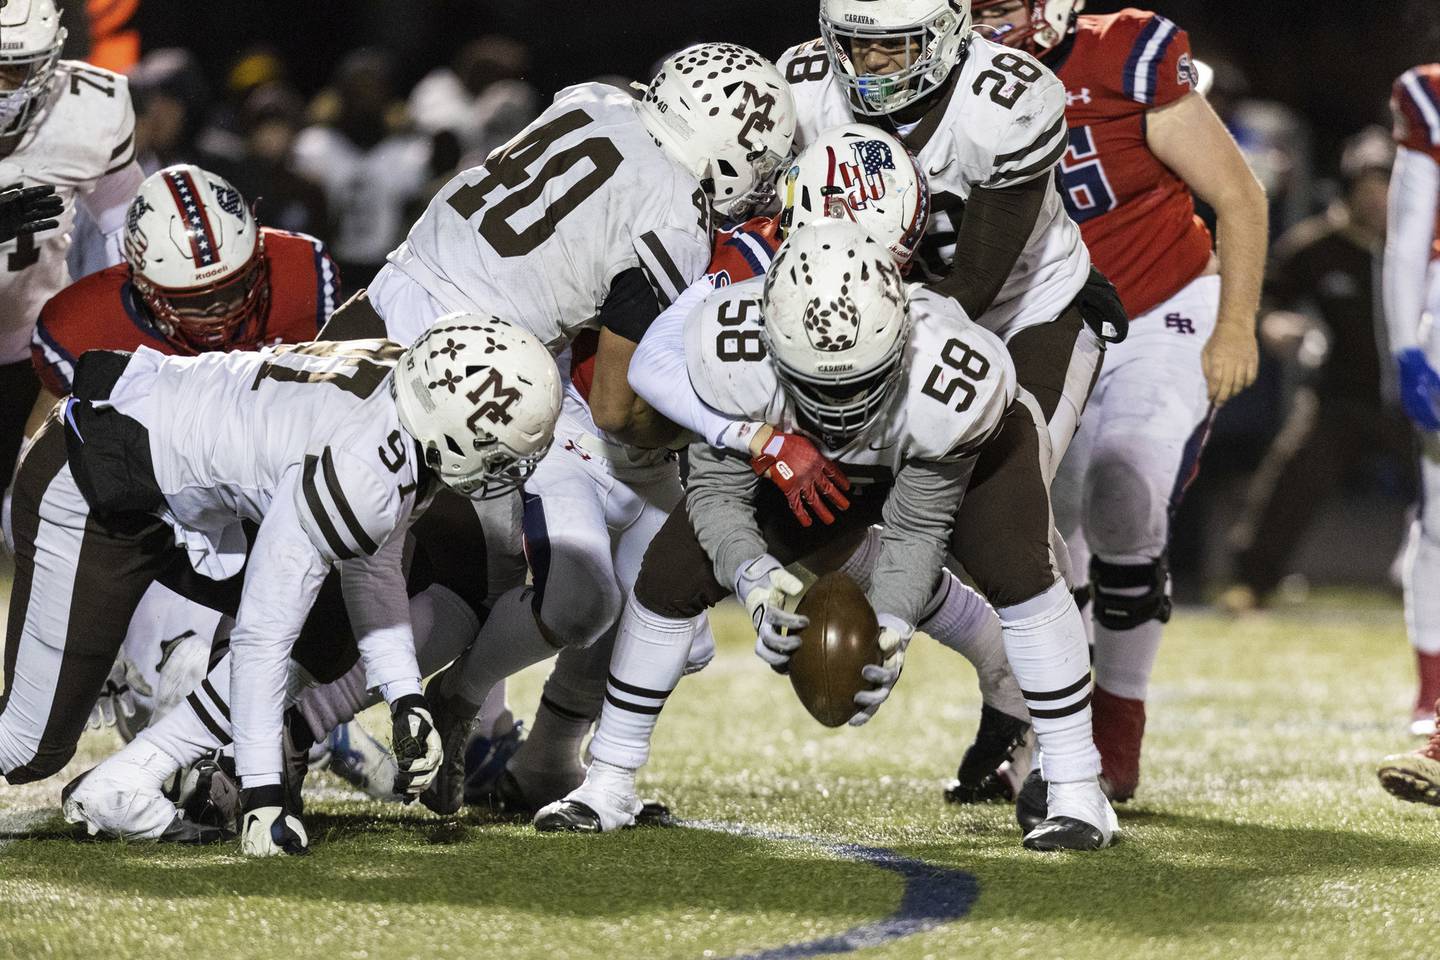 Mount Carmel's Bobby Medina (58) scoops up a St. Rita fumble during a Class 7A state semifinal game in Chicago on Saturday, Nov. 19, 2022.